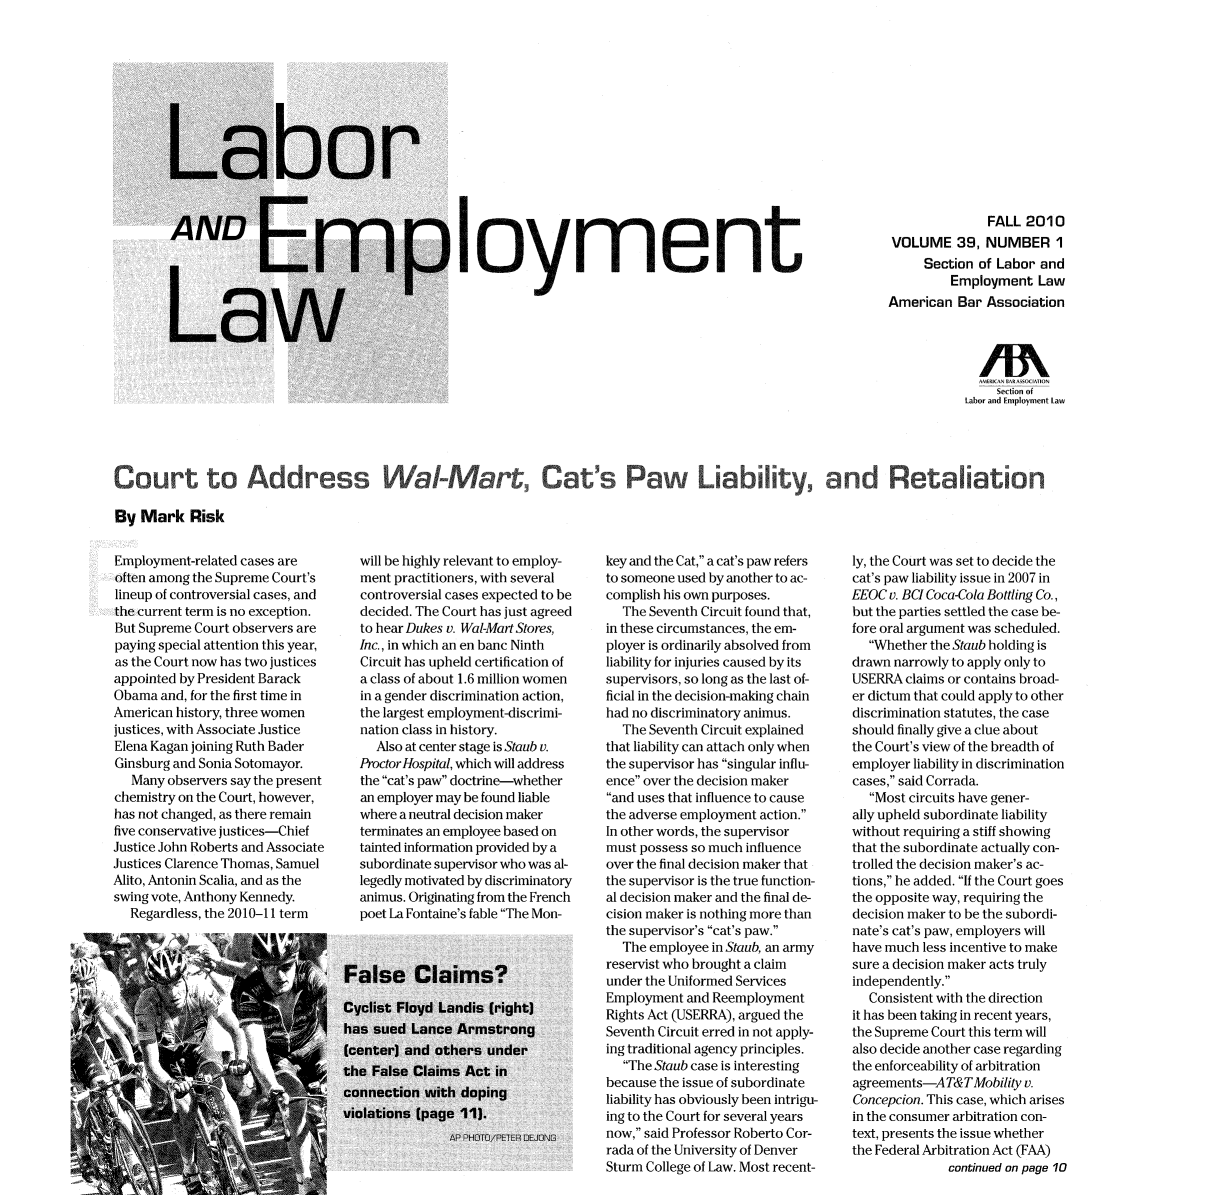 handle is hein.journals/laboemplo39 and id is 1 raw text is: loymen

FALL 2010
VOLUME 39, NUMBER 1
Section of Labor and
Employment Law
American Bar Association

/A
Section of
Labor and Employment Law
Court to Addre s WaI-M                          P         a        an r
By Mark Risk

Employment-related cases are
often among the Supreme Court's
lineup of controversial cases, and
the current term is no exception.
But Supreme Court observers are
paying special attention this year,
as the Court now has two justices
appointed by President Barack
Obama and, for the first time in
American history, three women
justices, with Associate Justice
Elena Kagan joining Ruth Bader
Ginsburg and Sonia Sotomayor.
Many observers say the present
chemistry on the Court, however,
has not changed, as there remain
five conservative justices-Chief
Justice John Roberts and Associate
Justices Clarence Thomas, Samuel
Alito, Antonin Scalia, and as the
swing vote, Anthony Kennedy.
Regardless, the 2010-11 term

will be highly relevant to employ-
ment practitioners, with several
controversial cases expected to be
decided. The Court has just agreed
to hear Dukes v. Wal-Mart Stores,
Inc., in which an en banc Ninth
Circuit has upheld certification of
a class of about 1.6 million women
in a gender discrimination action,
the largest employment-discrimi-
nation class in history.
Also at center stage is Staub v.
Proctor Hospital, which will address
the cat's paw doctrine-whether
an employer may be found liable
where a neutral decision maker
terminates an employee based on
tainted information provided by a
subordinate supervisor who was al-
legedly motivated by discriminatory
animus. Originating from the French
poet La Fontaine's fable The Mon-

key and the Cat, a cat's paw refers
to someone used by another to ac-
complish his own purposes.
The Seventh Circuit found that,
in these circumstances, the em-
ployer is ordinarily absolved from
liability for injuries caused by its
supervisors, so long as the last of-
ficial in the decision-making chain
had no discriminatory animus.
The Seventh Circuit explained
that liability can attach only when
the supervisor has singular influ-
ence over the decision maker
and uses that influence to cause
the adverse employment action.
In other words, the supervisor
must possess so much influence
over the final decision maker that
the supervisor is the true function-
al decision maker and the final de-
cision maker is nothing more than
the supervisor's cat's paw.
The employee in Staub, an army
reservist who brought a claim
under the Uniformed Services
Employment and Reemployment
Rights Act (USERRA), argued the
Seventh Circuit erred in not apply-
ing traditional agency principles.
The Staub case is interesting
because the issue of subordinate
liability has obviously been intrigu-
ing to the Court for several years
now, said Professor Roberto Cor-
rada of the University of Denver
Sturm College of Law. Most recent-

ly, the Court was set to decide the
cat's paw liability issue in 2007 in
EEOC v. BCI Coca-Cola Bottling Co.,
but the parties settled the case be-
fore oral argument was scheduled.
Whether the Staub holding is
drawn narrowly to apply only to
USERRA claims or contains broad-
er dictum that could apply to other
discrimination statutes, the case
should finally give a clue about
the Court's view of the breadth of
employer liability in discrimination
cases, said Corrada.
Most circuits have gener-
ally upheld subordinate liability
without requiring a stiff showing
that the subordinate actually con-
trolled the decision maker's ac-
tions, he added. If the Court goes
the opposite way, requiring the
decision maker to be the subordi-
nate's cat's paw, employers will
have much less incentive to make
sure a decision maker acts truly
independently.
Consistent with the direction
it has been taking in recent years,
the Supreme Court this term will
also decide another case regarding
the enforceability of arbitration
agreements-AT&TMobility v.
Concepcion. This case, which arises
in the consumer arbitration con-
text, presents the issue whether
the Federal Arbitration Act (FAA)
continued on page 10


